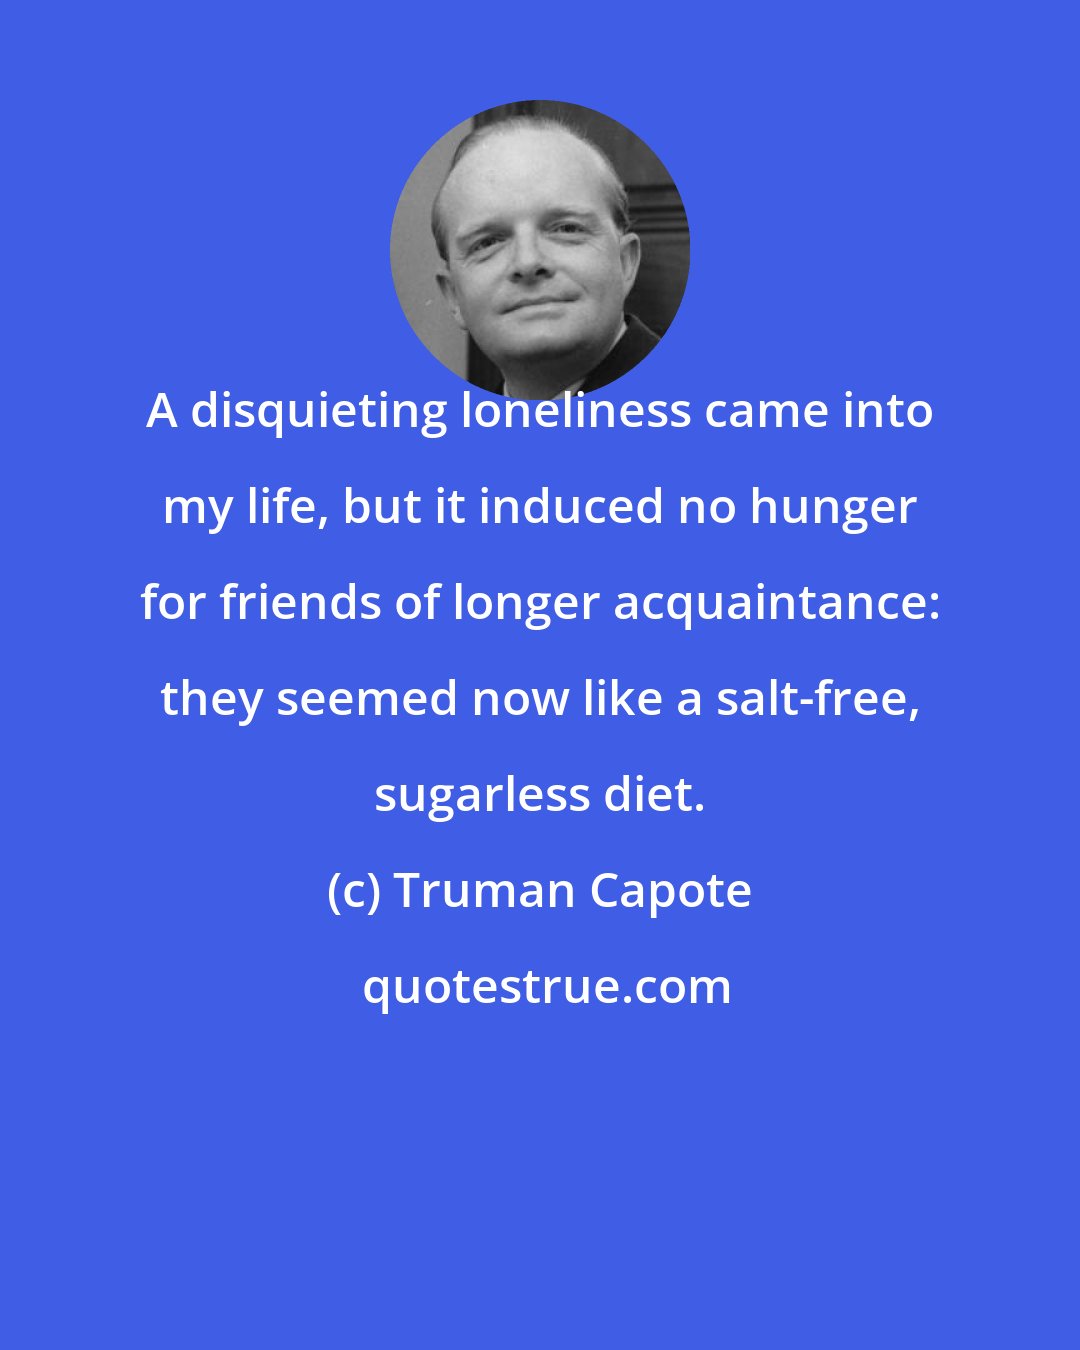 Truman Capote: A disquieting loneliness came into my life, but it induced no hunger for friends of longer acquaintance: they seemed now like a salt-free, sugarless diet.